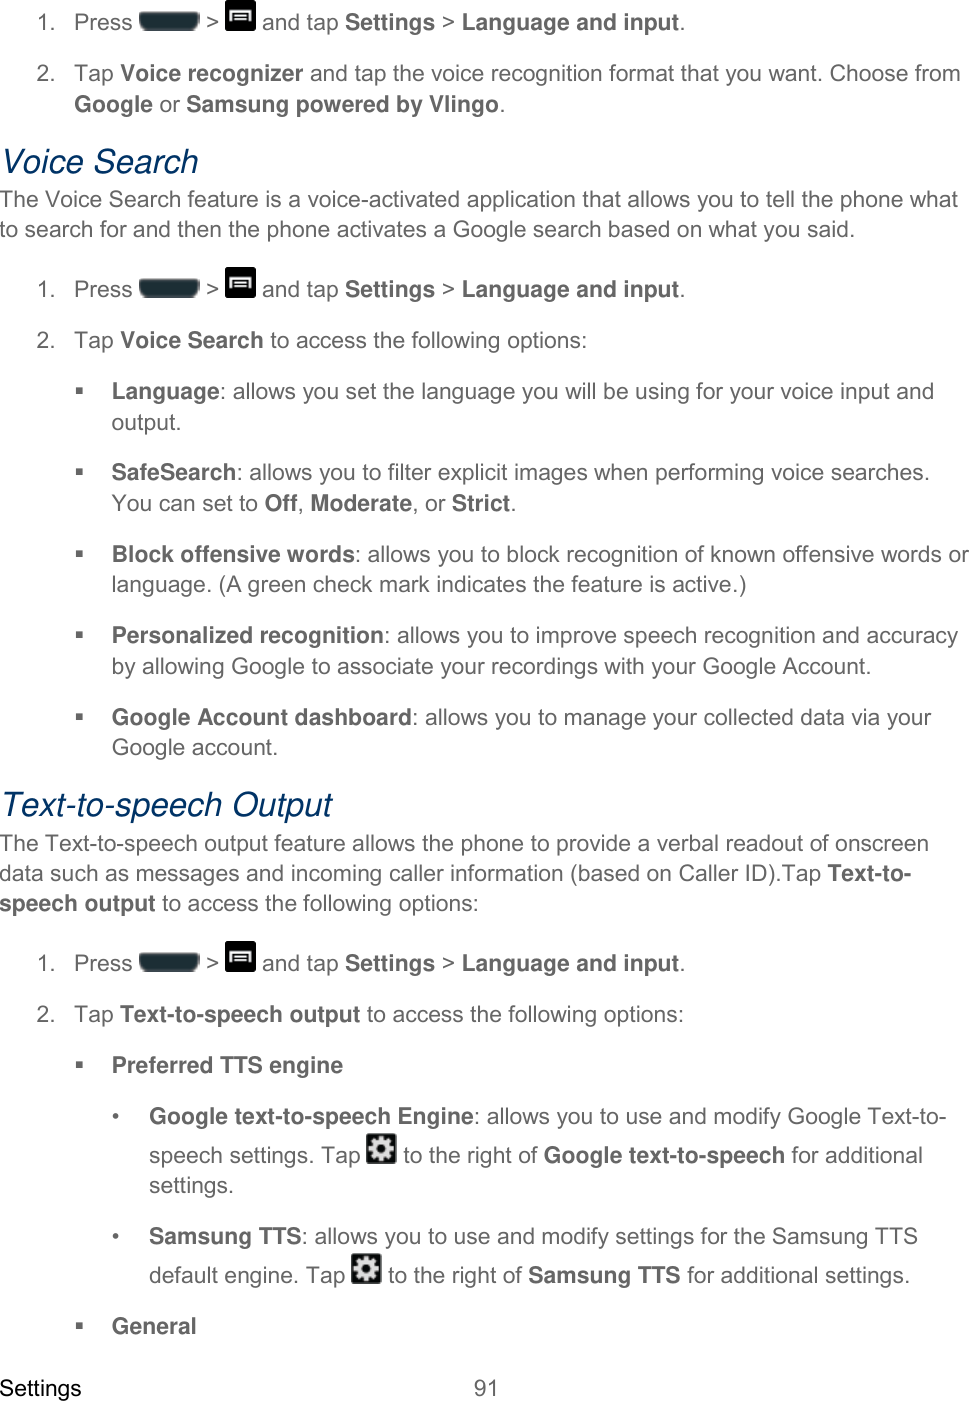 Settings 91   1.  Press   &gt;   and tap Settings &gt; Language and input. 2.  Tap Voice recognizer and tap the voice recognition format that you want. Choose from Google or Samsung powered by Vlingo. Voice Search The Voice Search feature is a voice-activated application that allows you to tell the phone what to search for and then the phone activates a Google search based on what you said. 1.  Press   &gt;   and tap Settings &gt; Language and input. 2.  Tap Voice Search to access the following options:  Language: allows you set the language you will be using for your voice input and output.  SafeSearch: allows you to filter explicit images when performing voice searches. You can set to Off, Moderate, or Strict.  Block offensive words: allows you to block recognition of known offensive words or language. (A green check mark indicates the feature is active.)  Personalized recognition: allows you to improve speech recognition and accuracy by allowing Google to associate your recordings with your Google Account.  Google Account dashboard: allows you to manage your collected data via your Google account. Text-to-speech Output The Text-to-speech output feature allows the phone to provide a verbal readout of onscreen data such as messages and incoming caller information (based on Caller ID).Tap Text-to-speech output to access the following options: 1.  Press   &gt;   and tap Settings &gt; Language and input. 2.  Tap Text-to-speech output to access the following options:  Preferred TTS engine •  Google text-to-speech Engine: allows you to use and modify Google Text-to-speech settings. Tap   to the right of Google text-to-speech for additional settings.  •  Samsung TTS: allows you to use and modify settings for the Samsung TTS default engine. Tap   to the right of Samsung TTS for additional settings.  General 